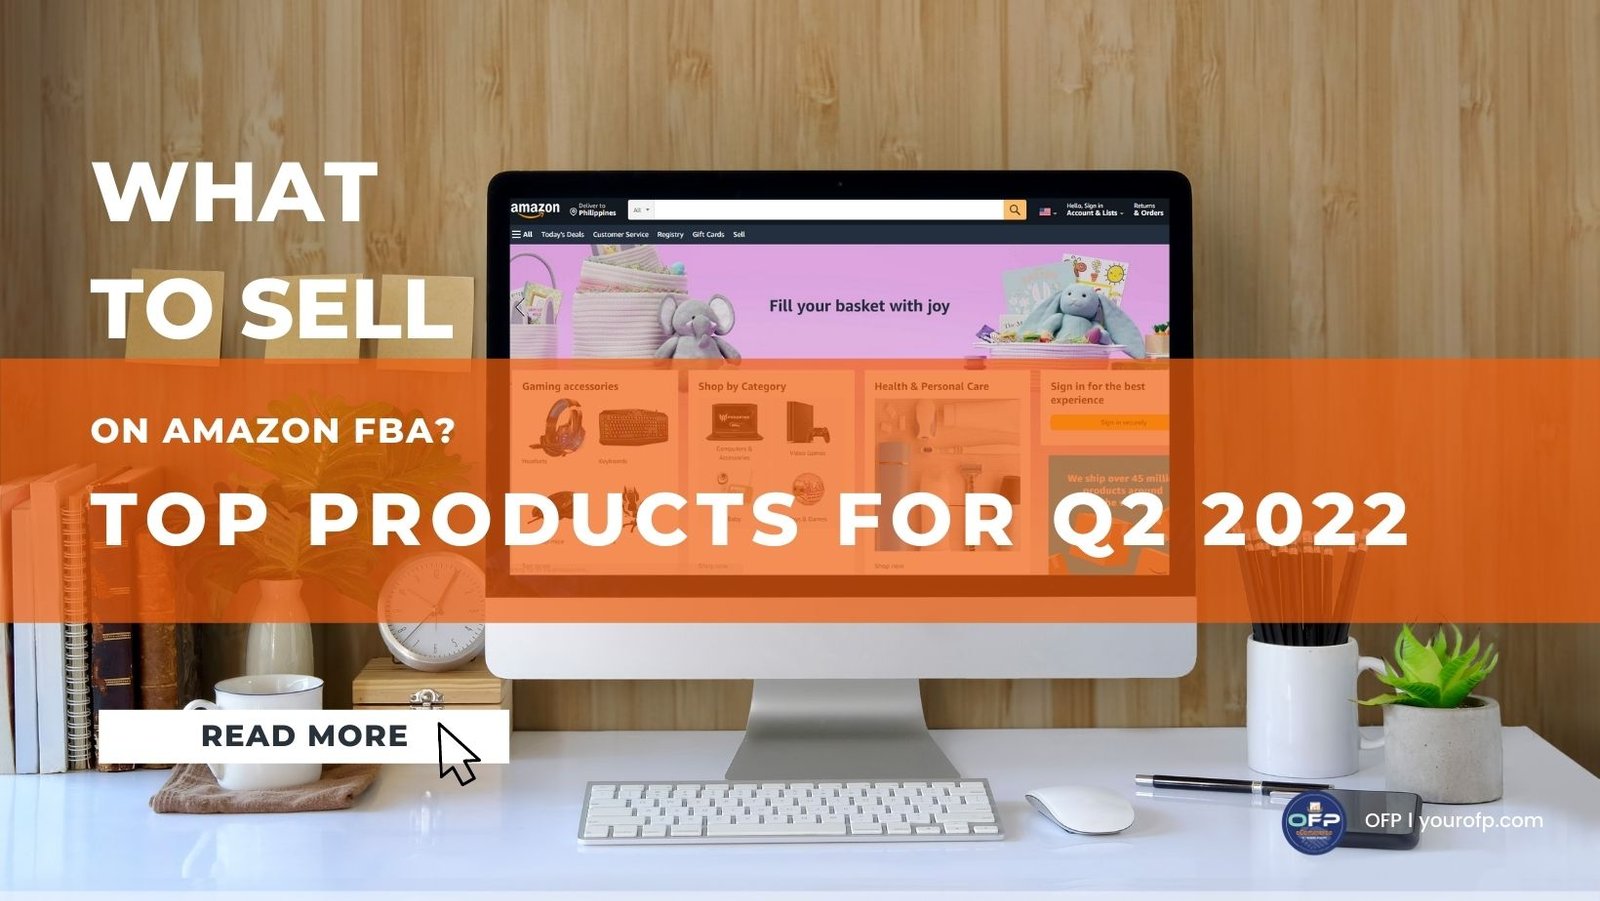 What to Sell on Amazon FBA? Top Products for Q2 2022